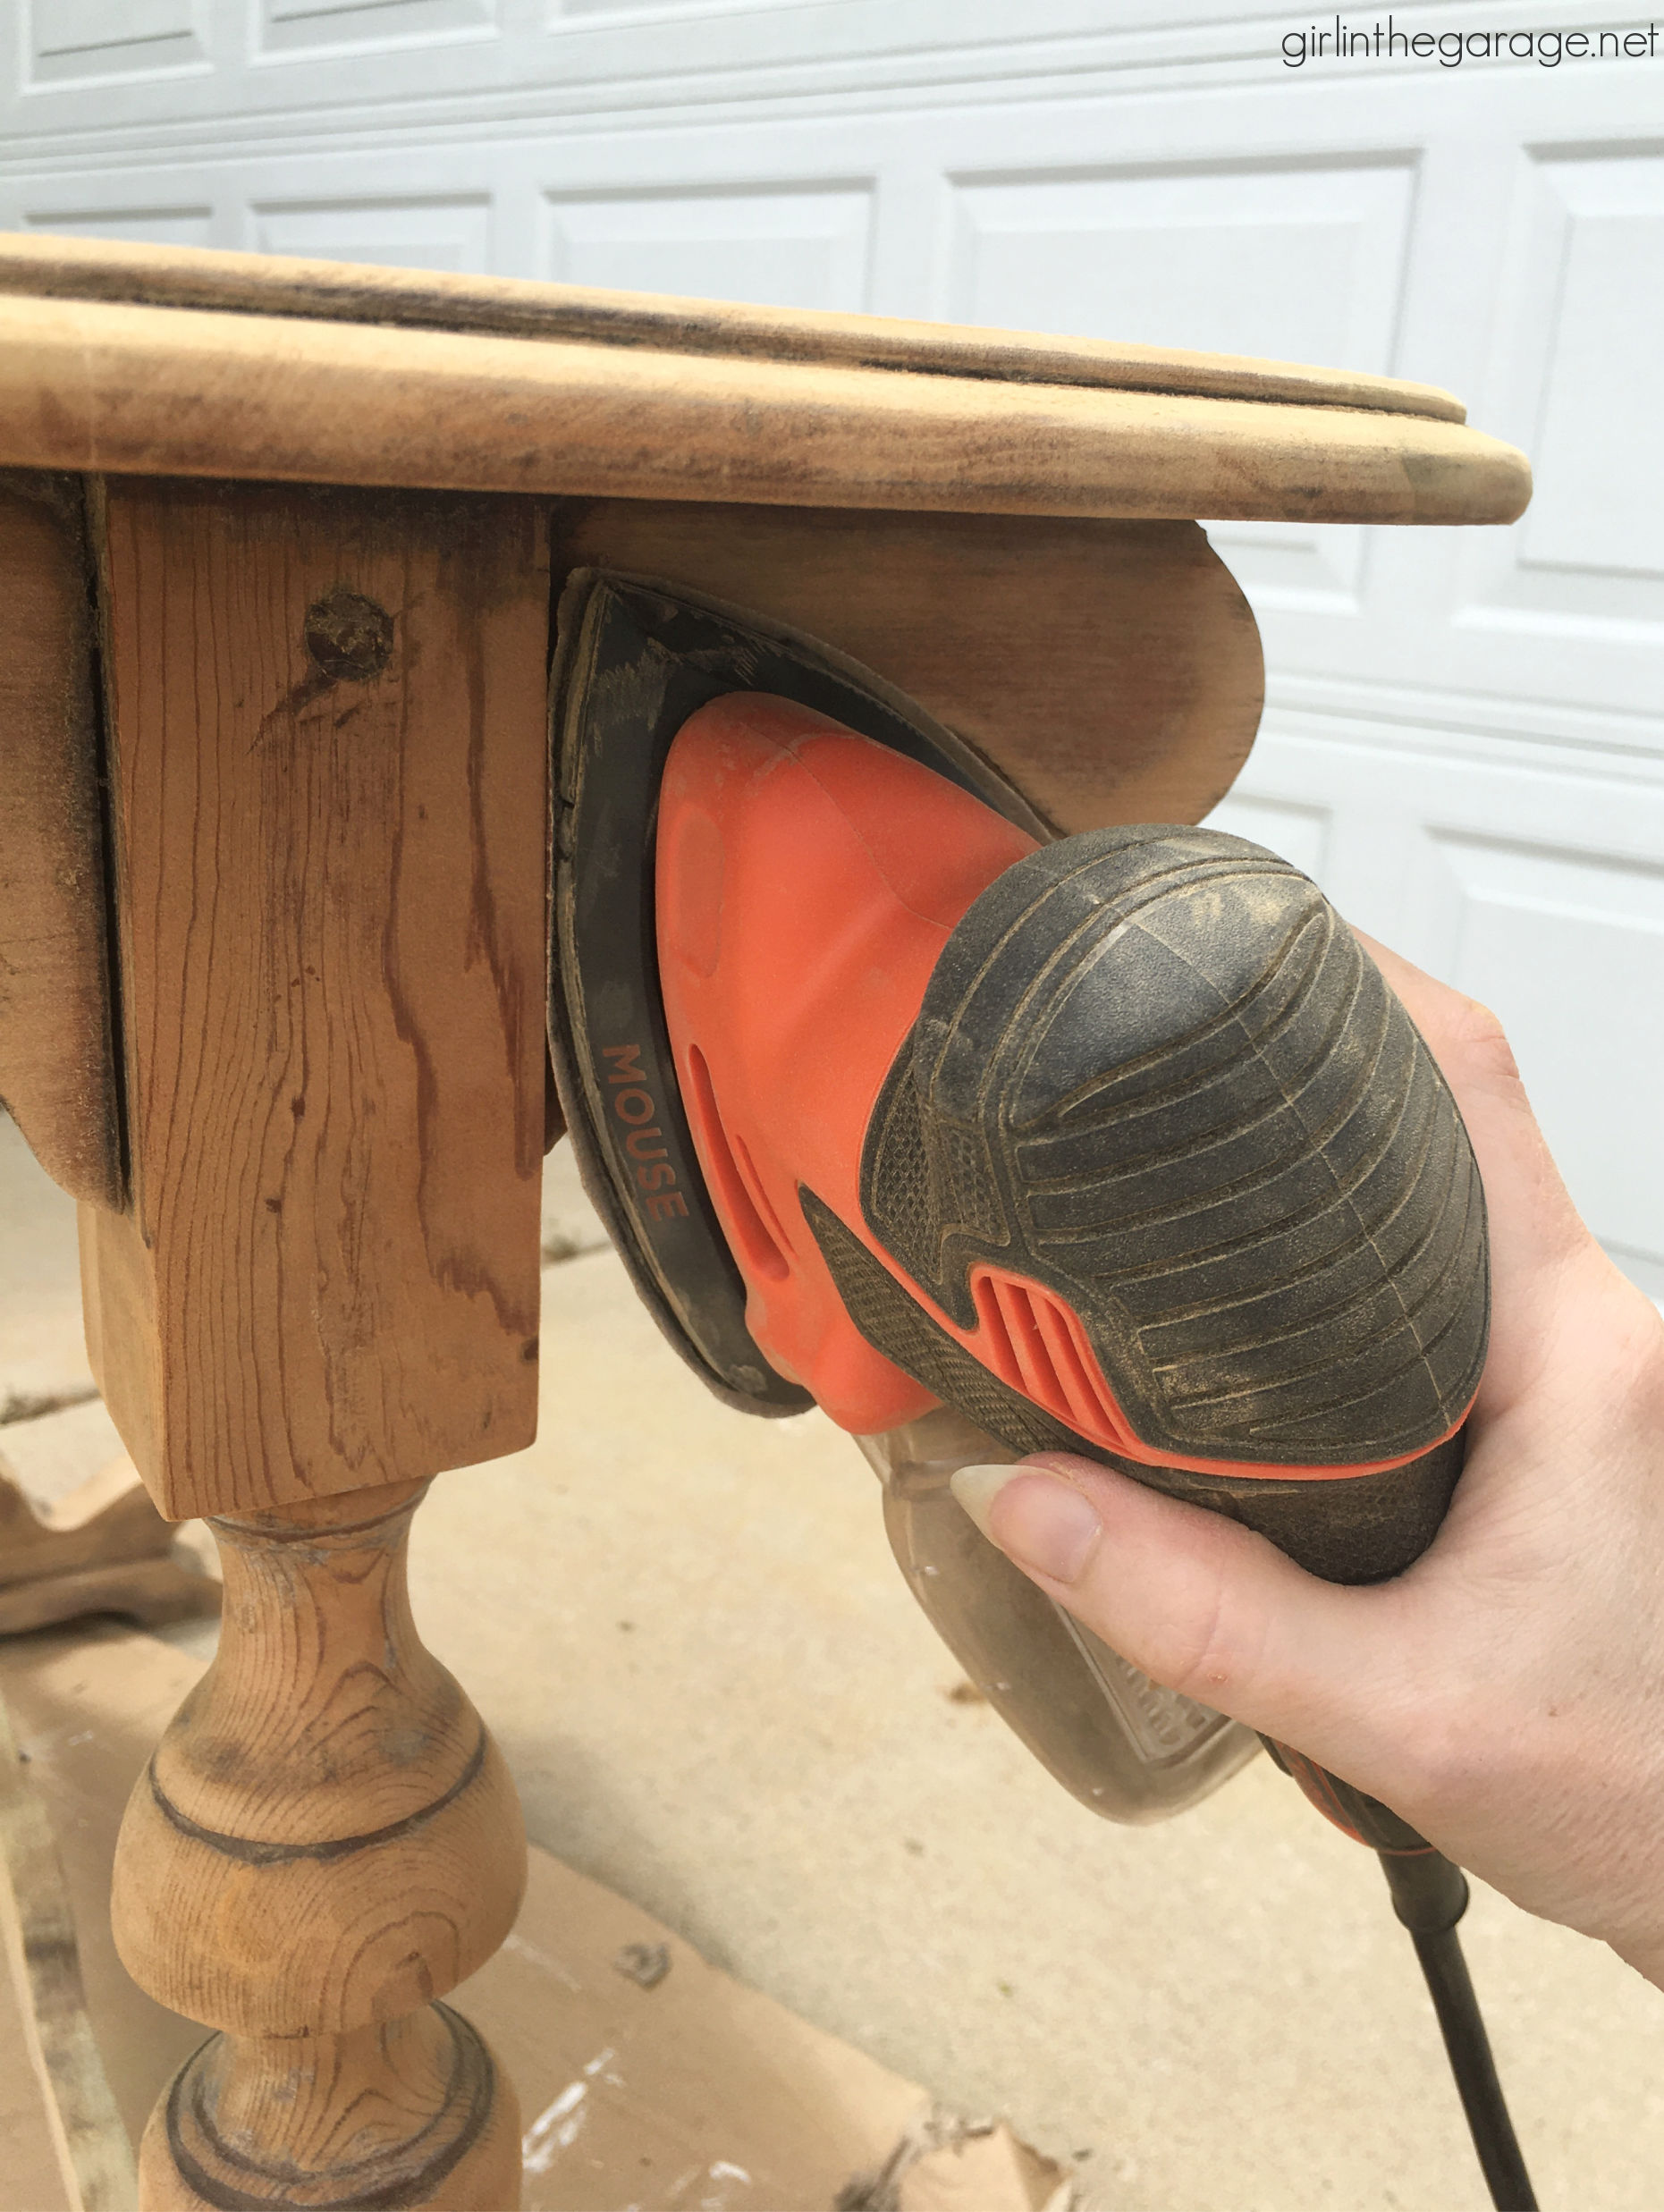 How to use a detail sander on wood furniture - Girl in the Garage